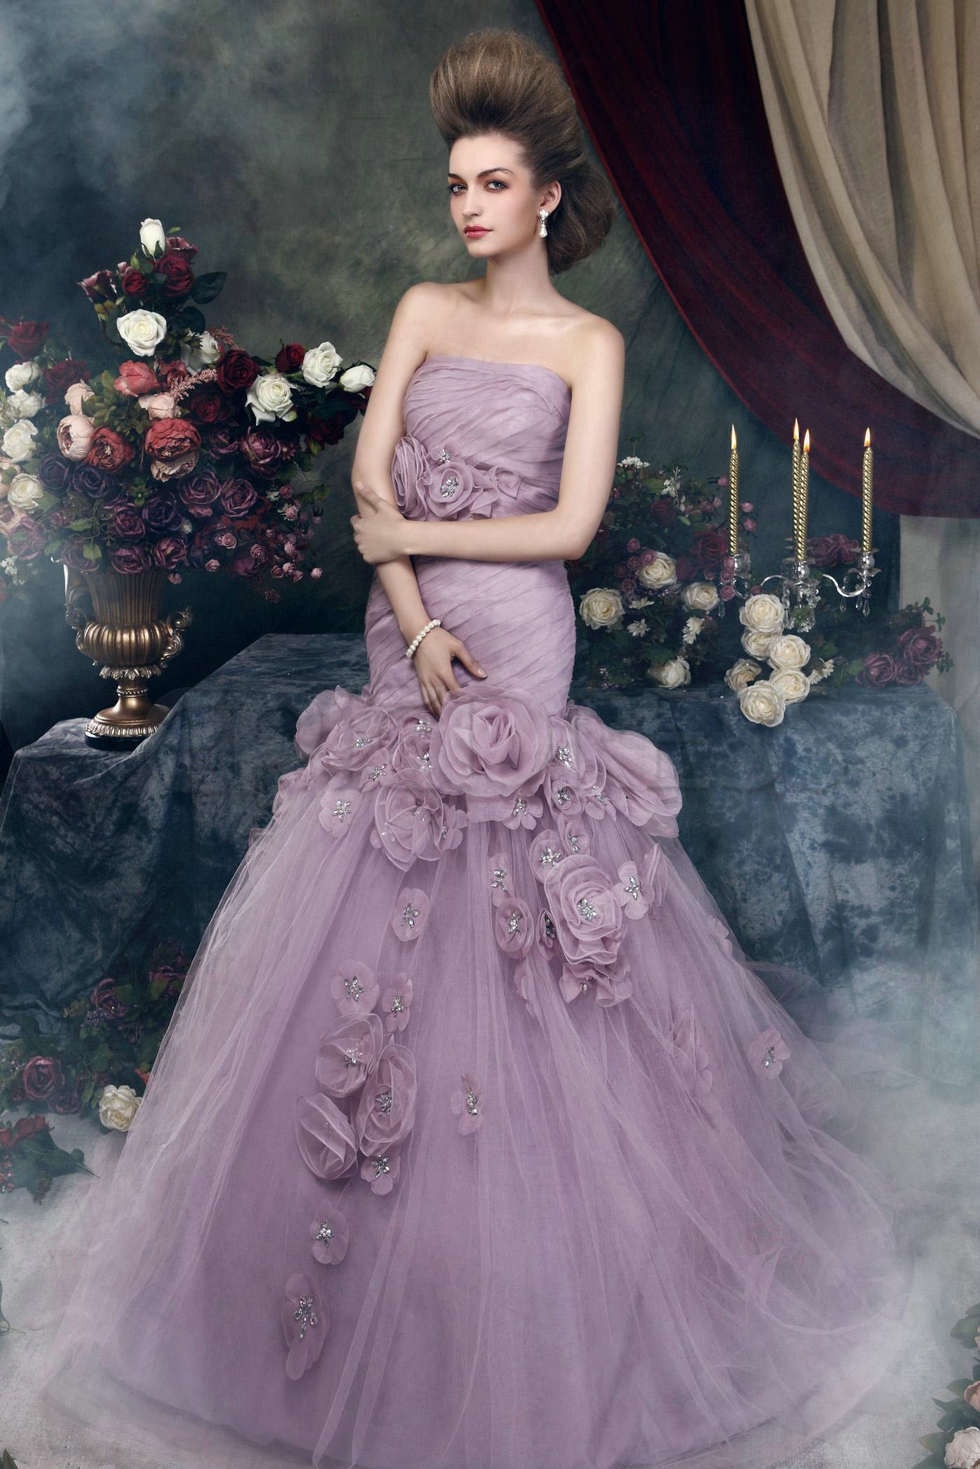 Colored Wedding Dress
 So Charming on a Purple Wedding Gown